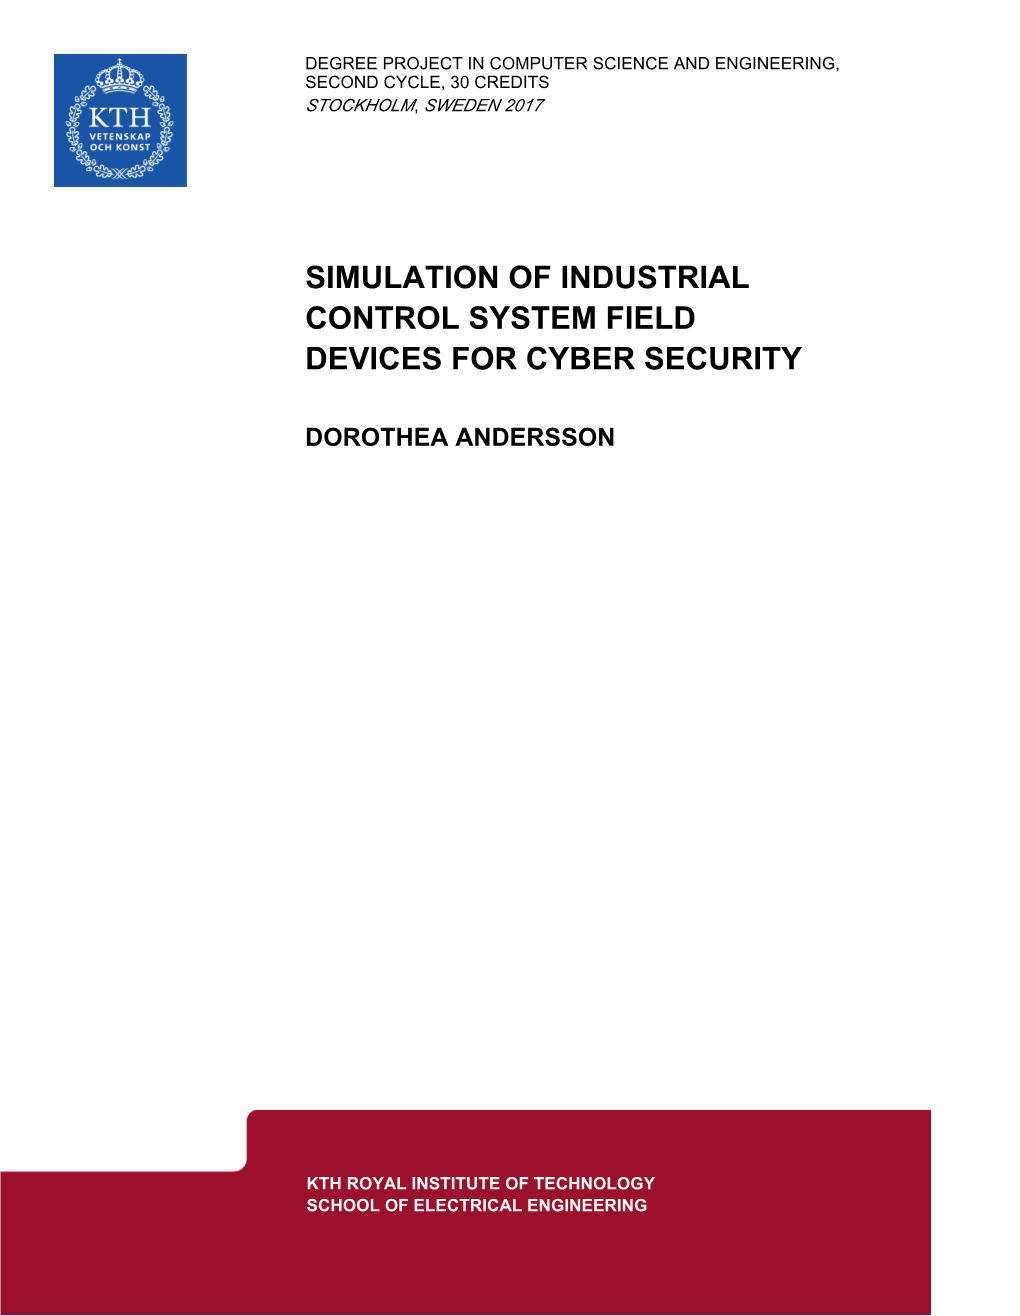 Simulation of Industrial Control System Field Devices for Cyber Security